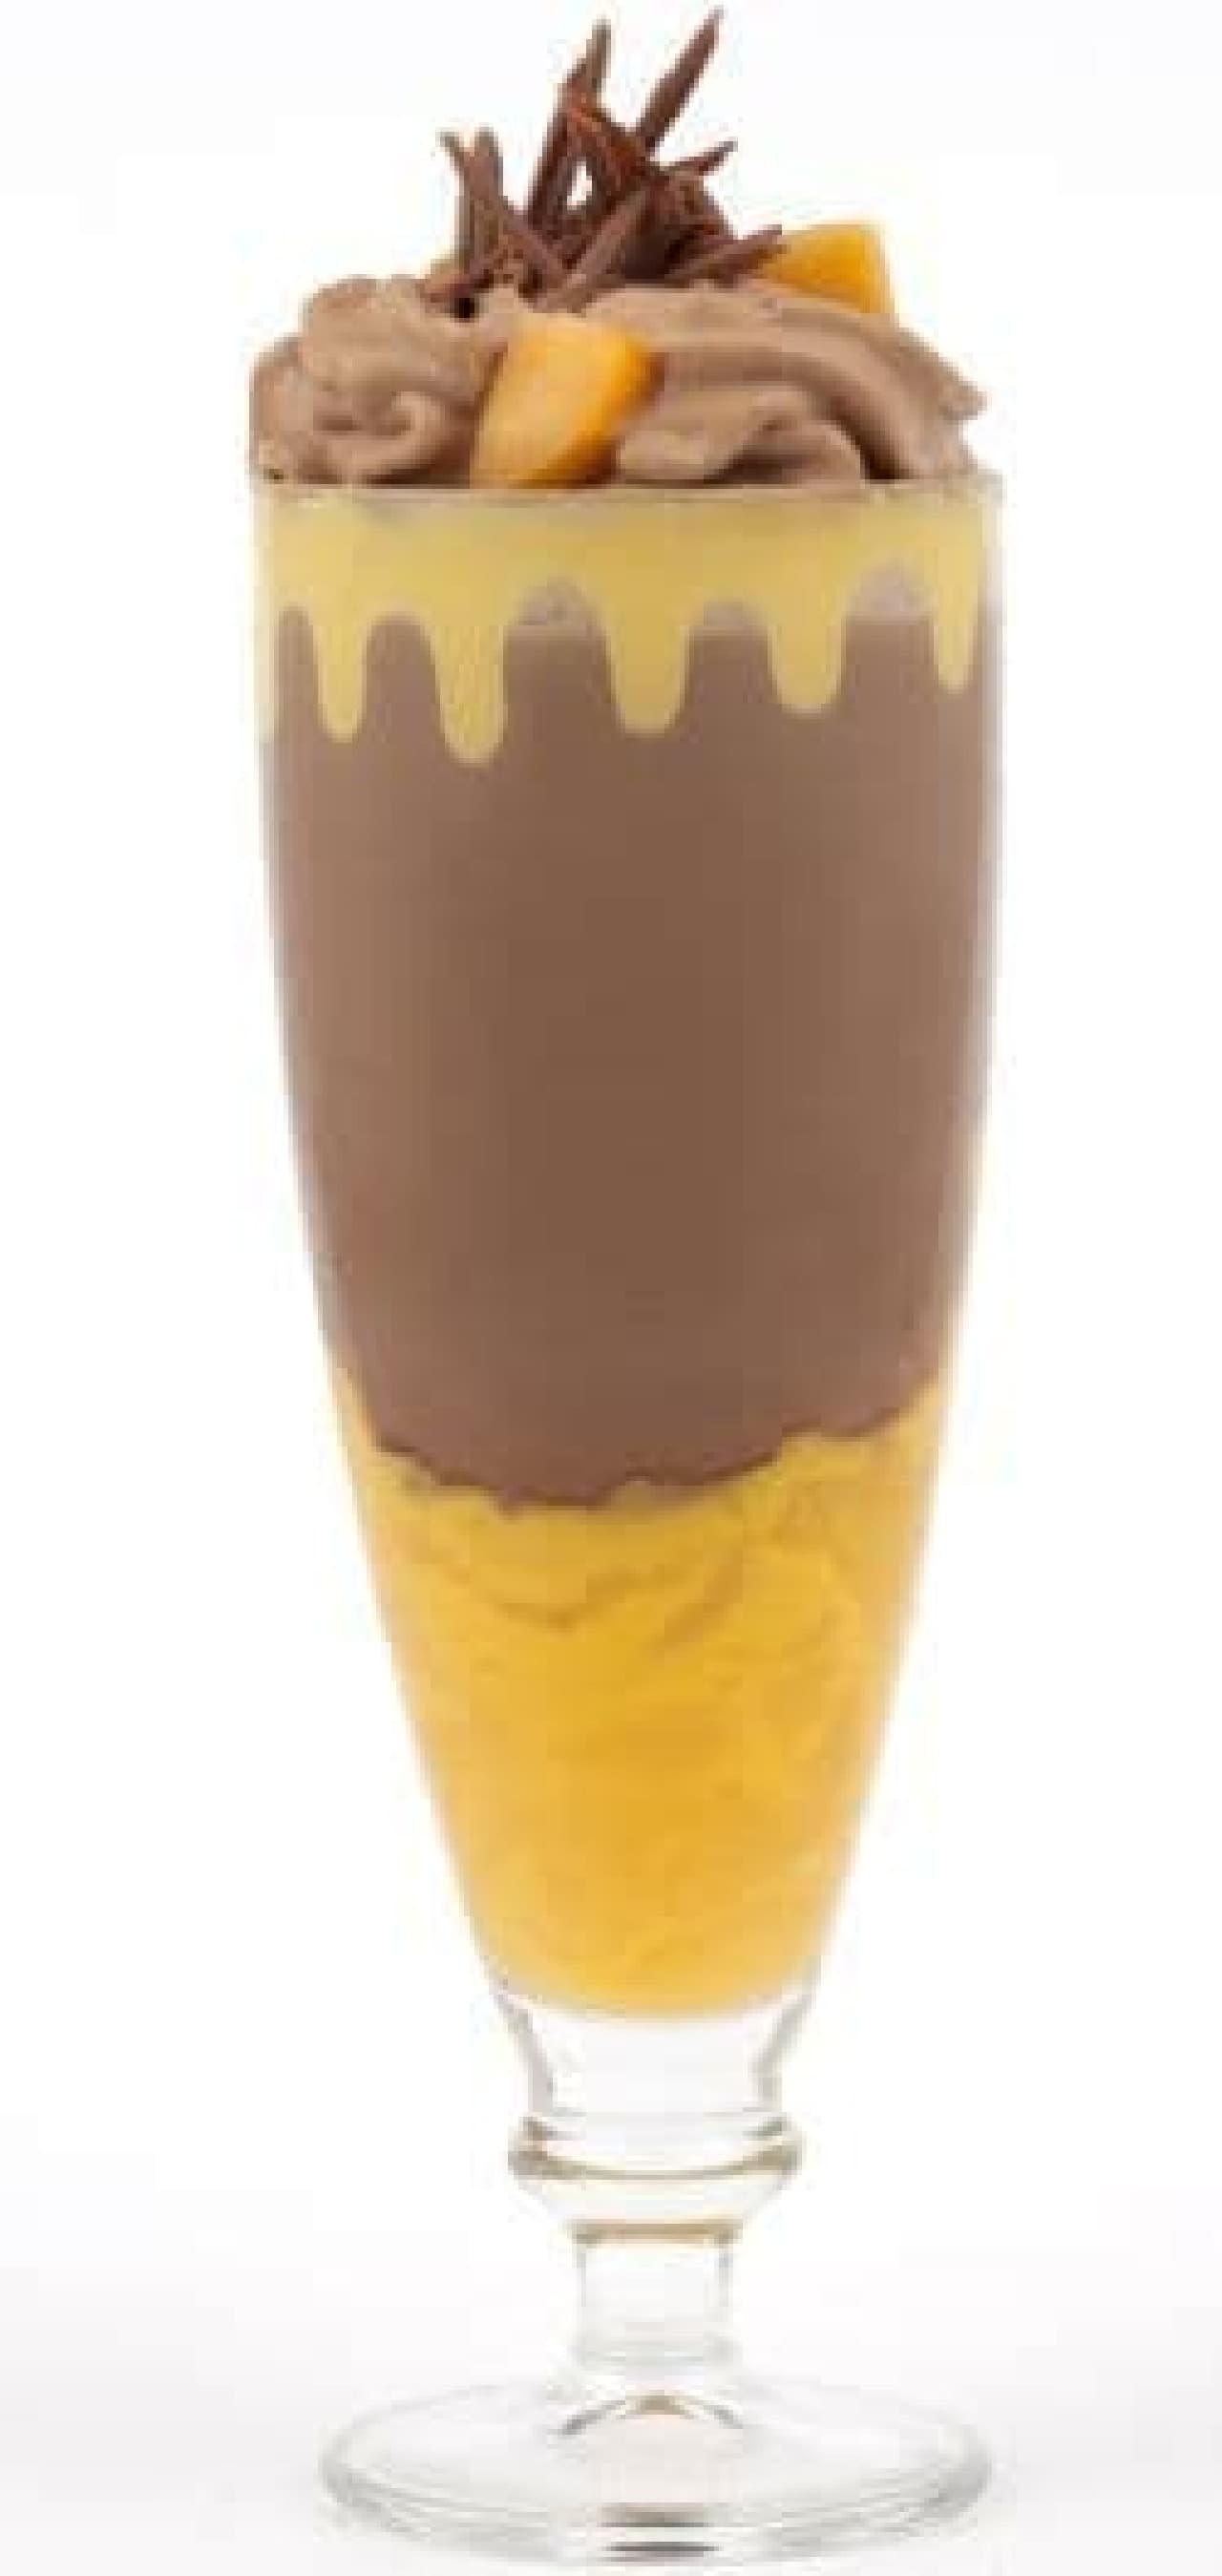 Milk chocolate mango ice drink is a combination of cold chocolate drink and sieving mango pudding.